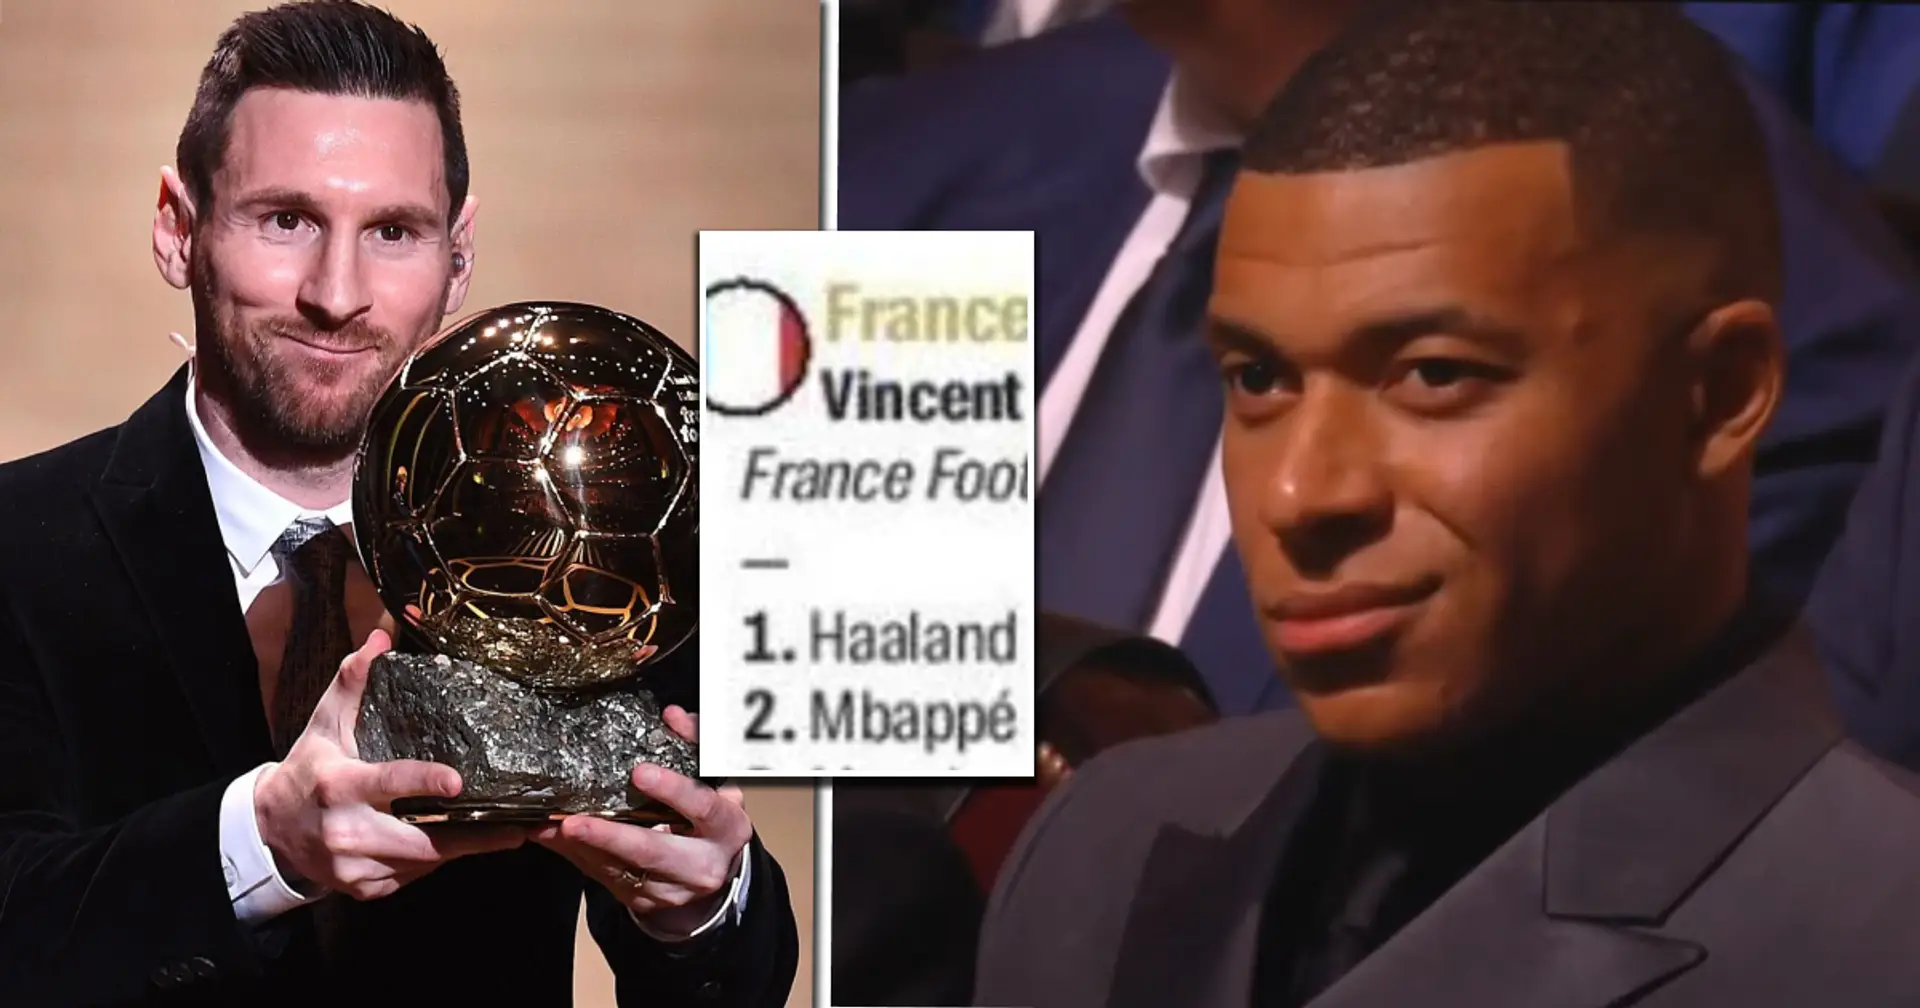 France journalist snubs Mbappe as top pick in Ballon d'Or voting